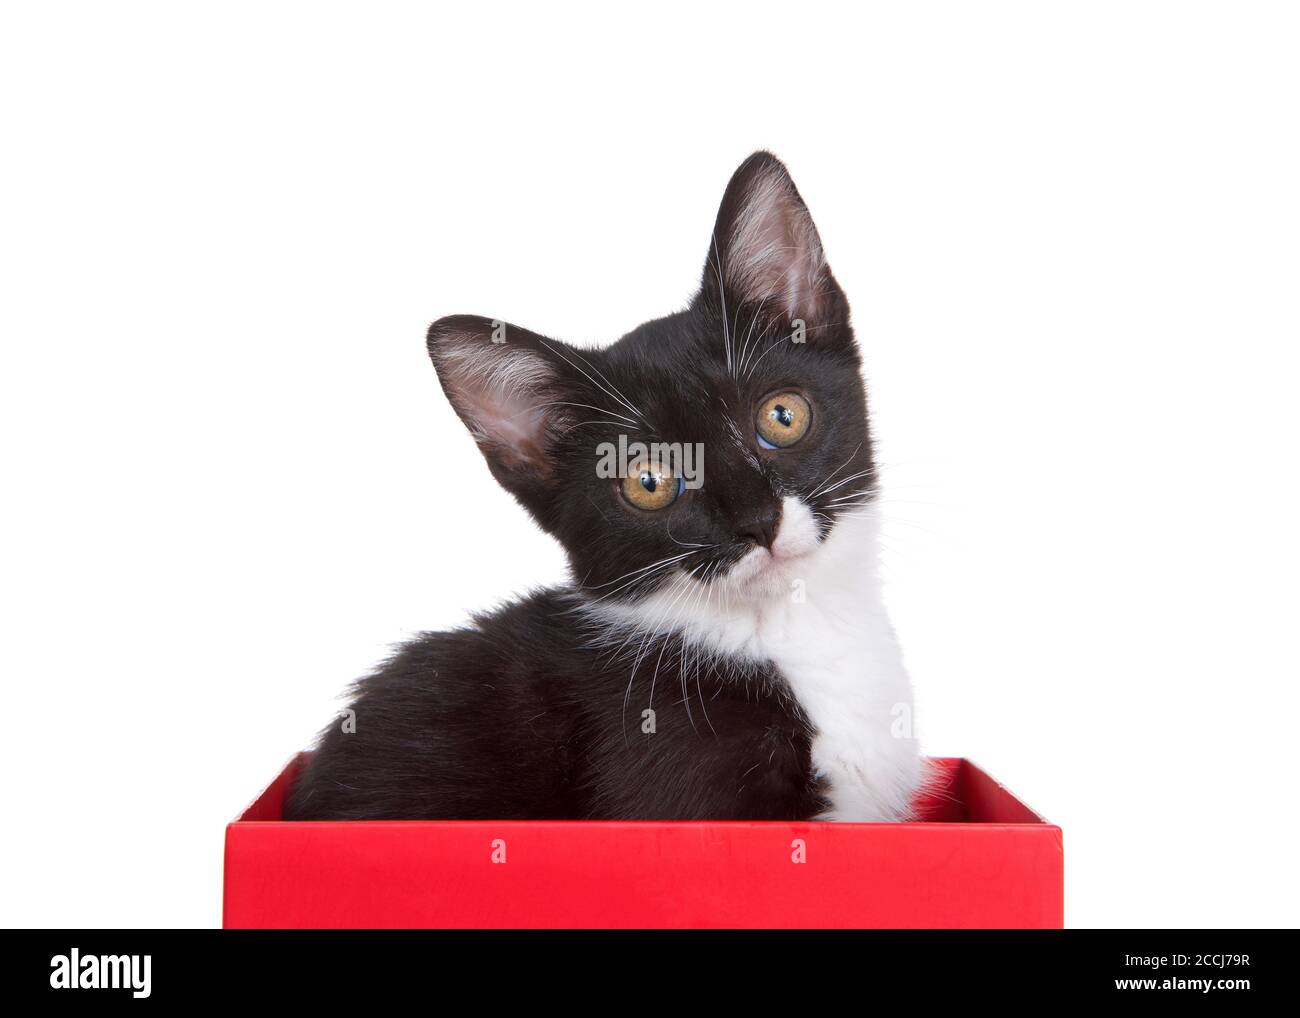 Black and white tuxedo kitten sitting in a red box looking quizzically at viewer, head tilted. Isolated on white Stock Photo